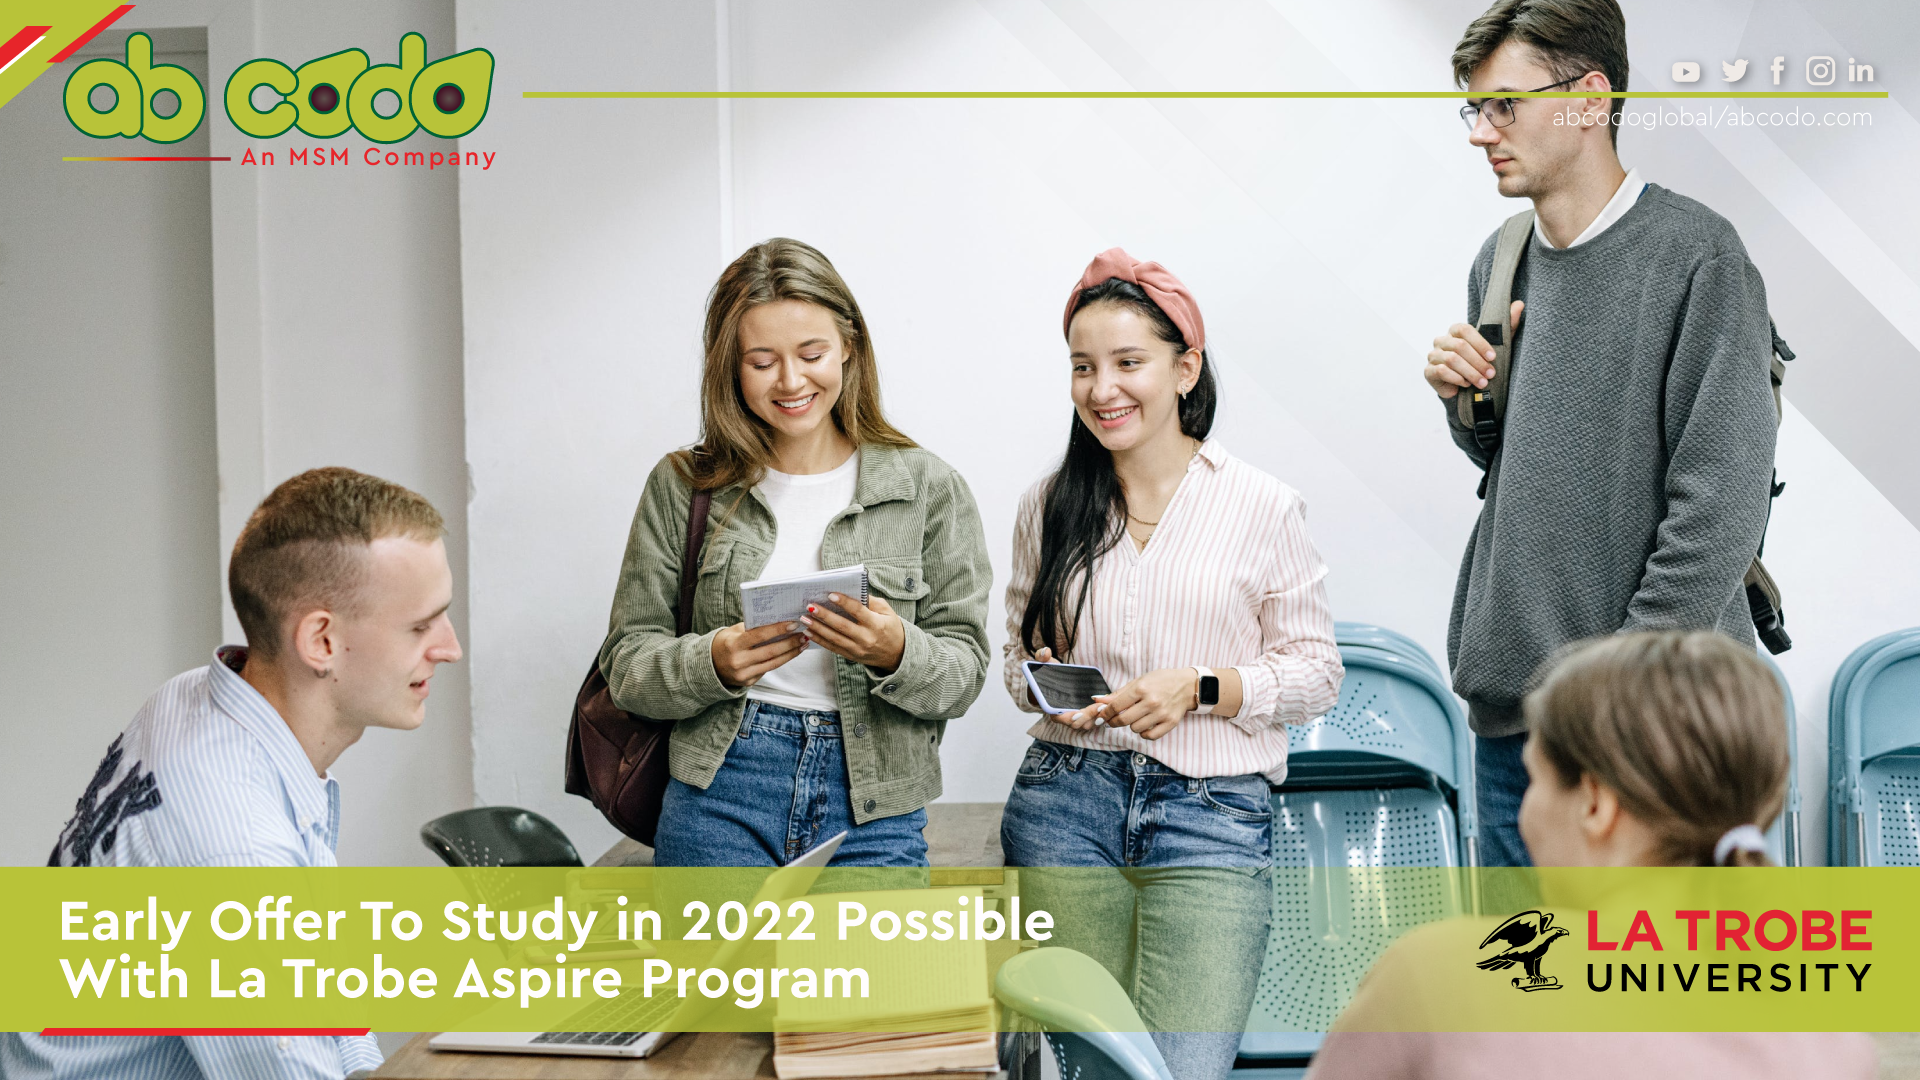 Early Offer To Study in 2022 Possible With La Trobe Aspire Program